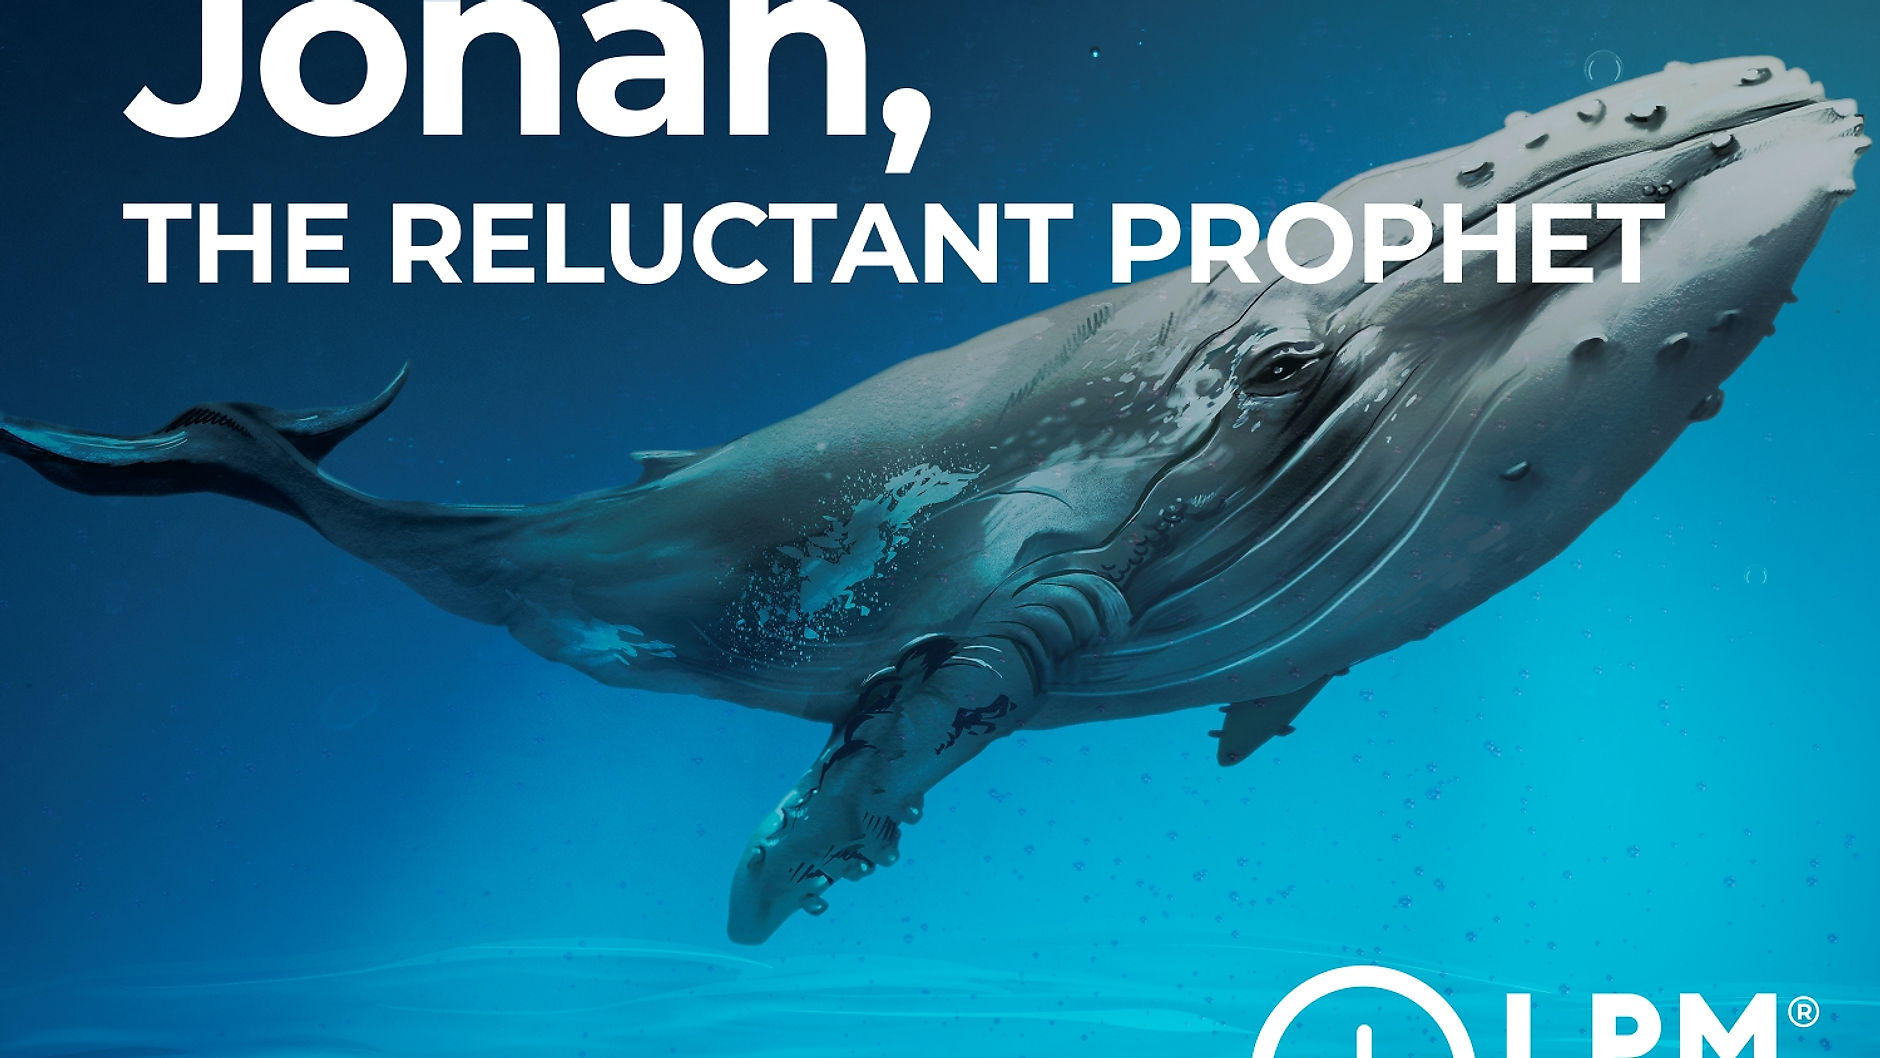 JONAH, THE RELUCTANT PROPHET